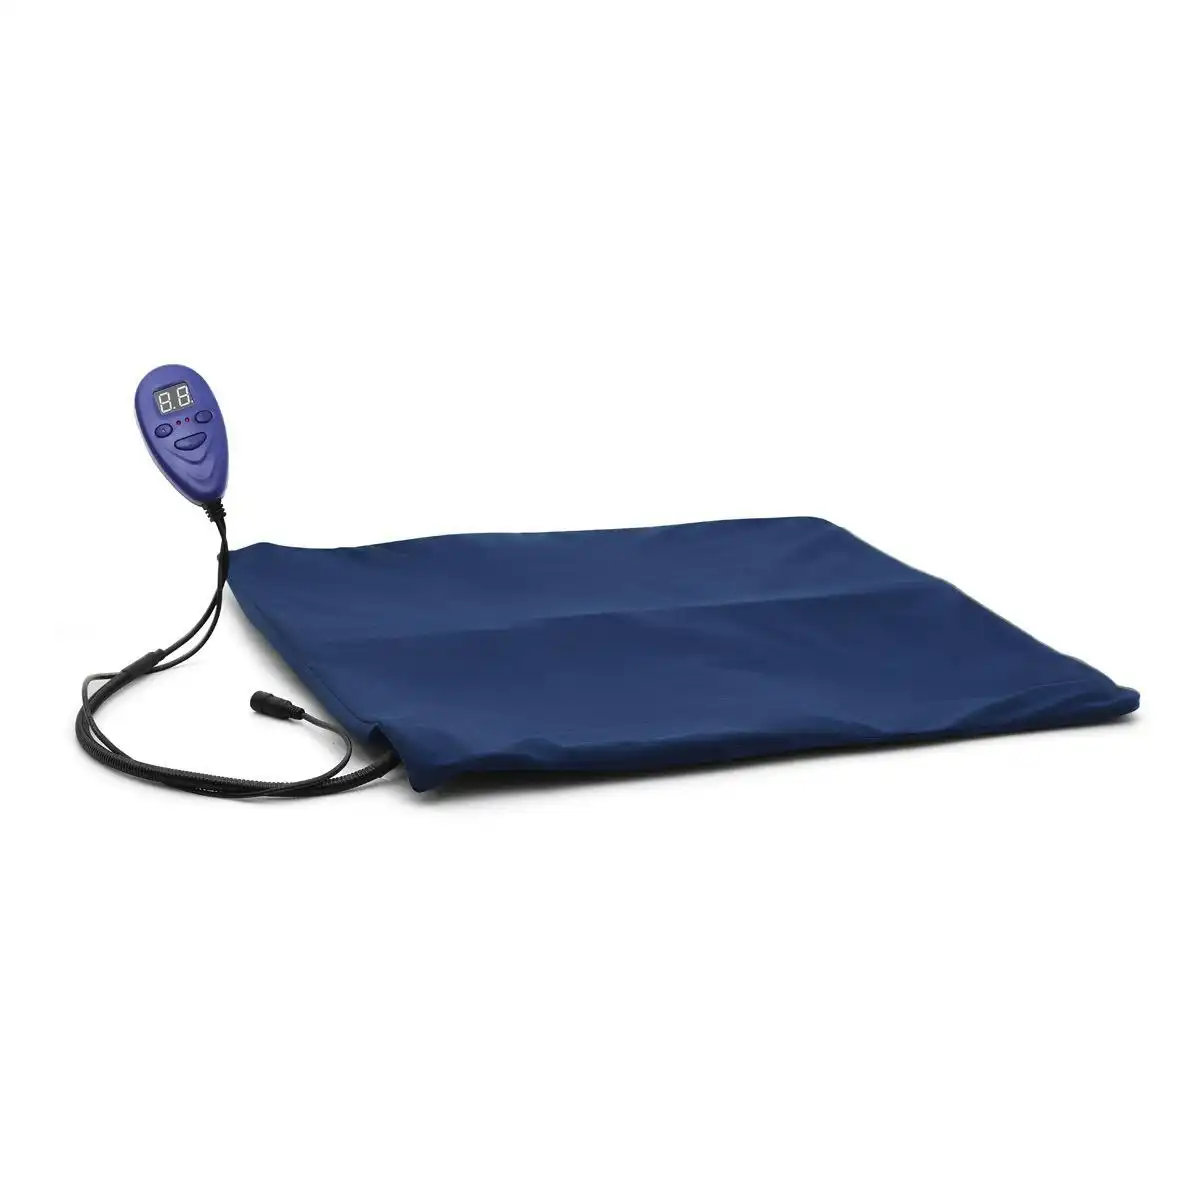 Ausway Electric Heating Pad for Pet Waterproof 50cm x 50cm with Thermal Protection & Temperature Display